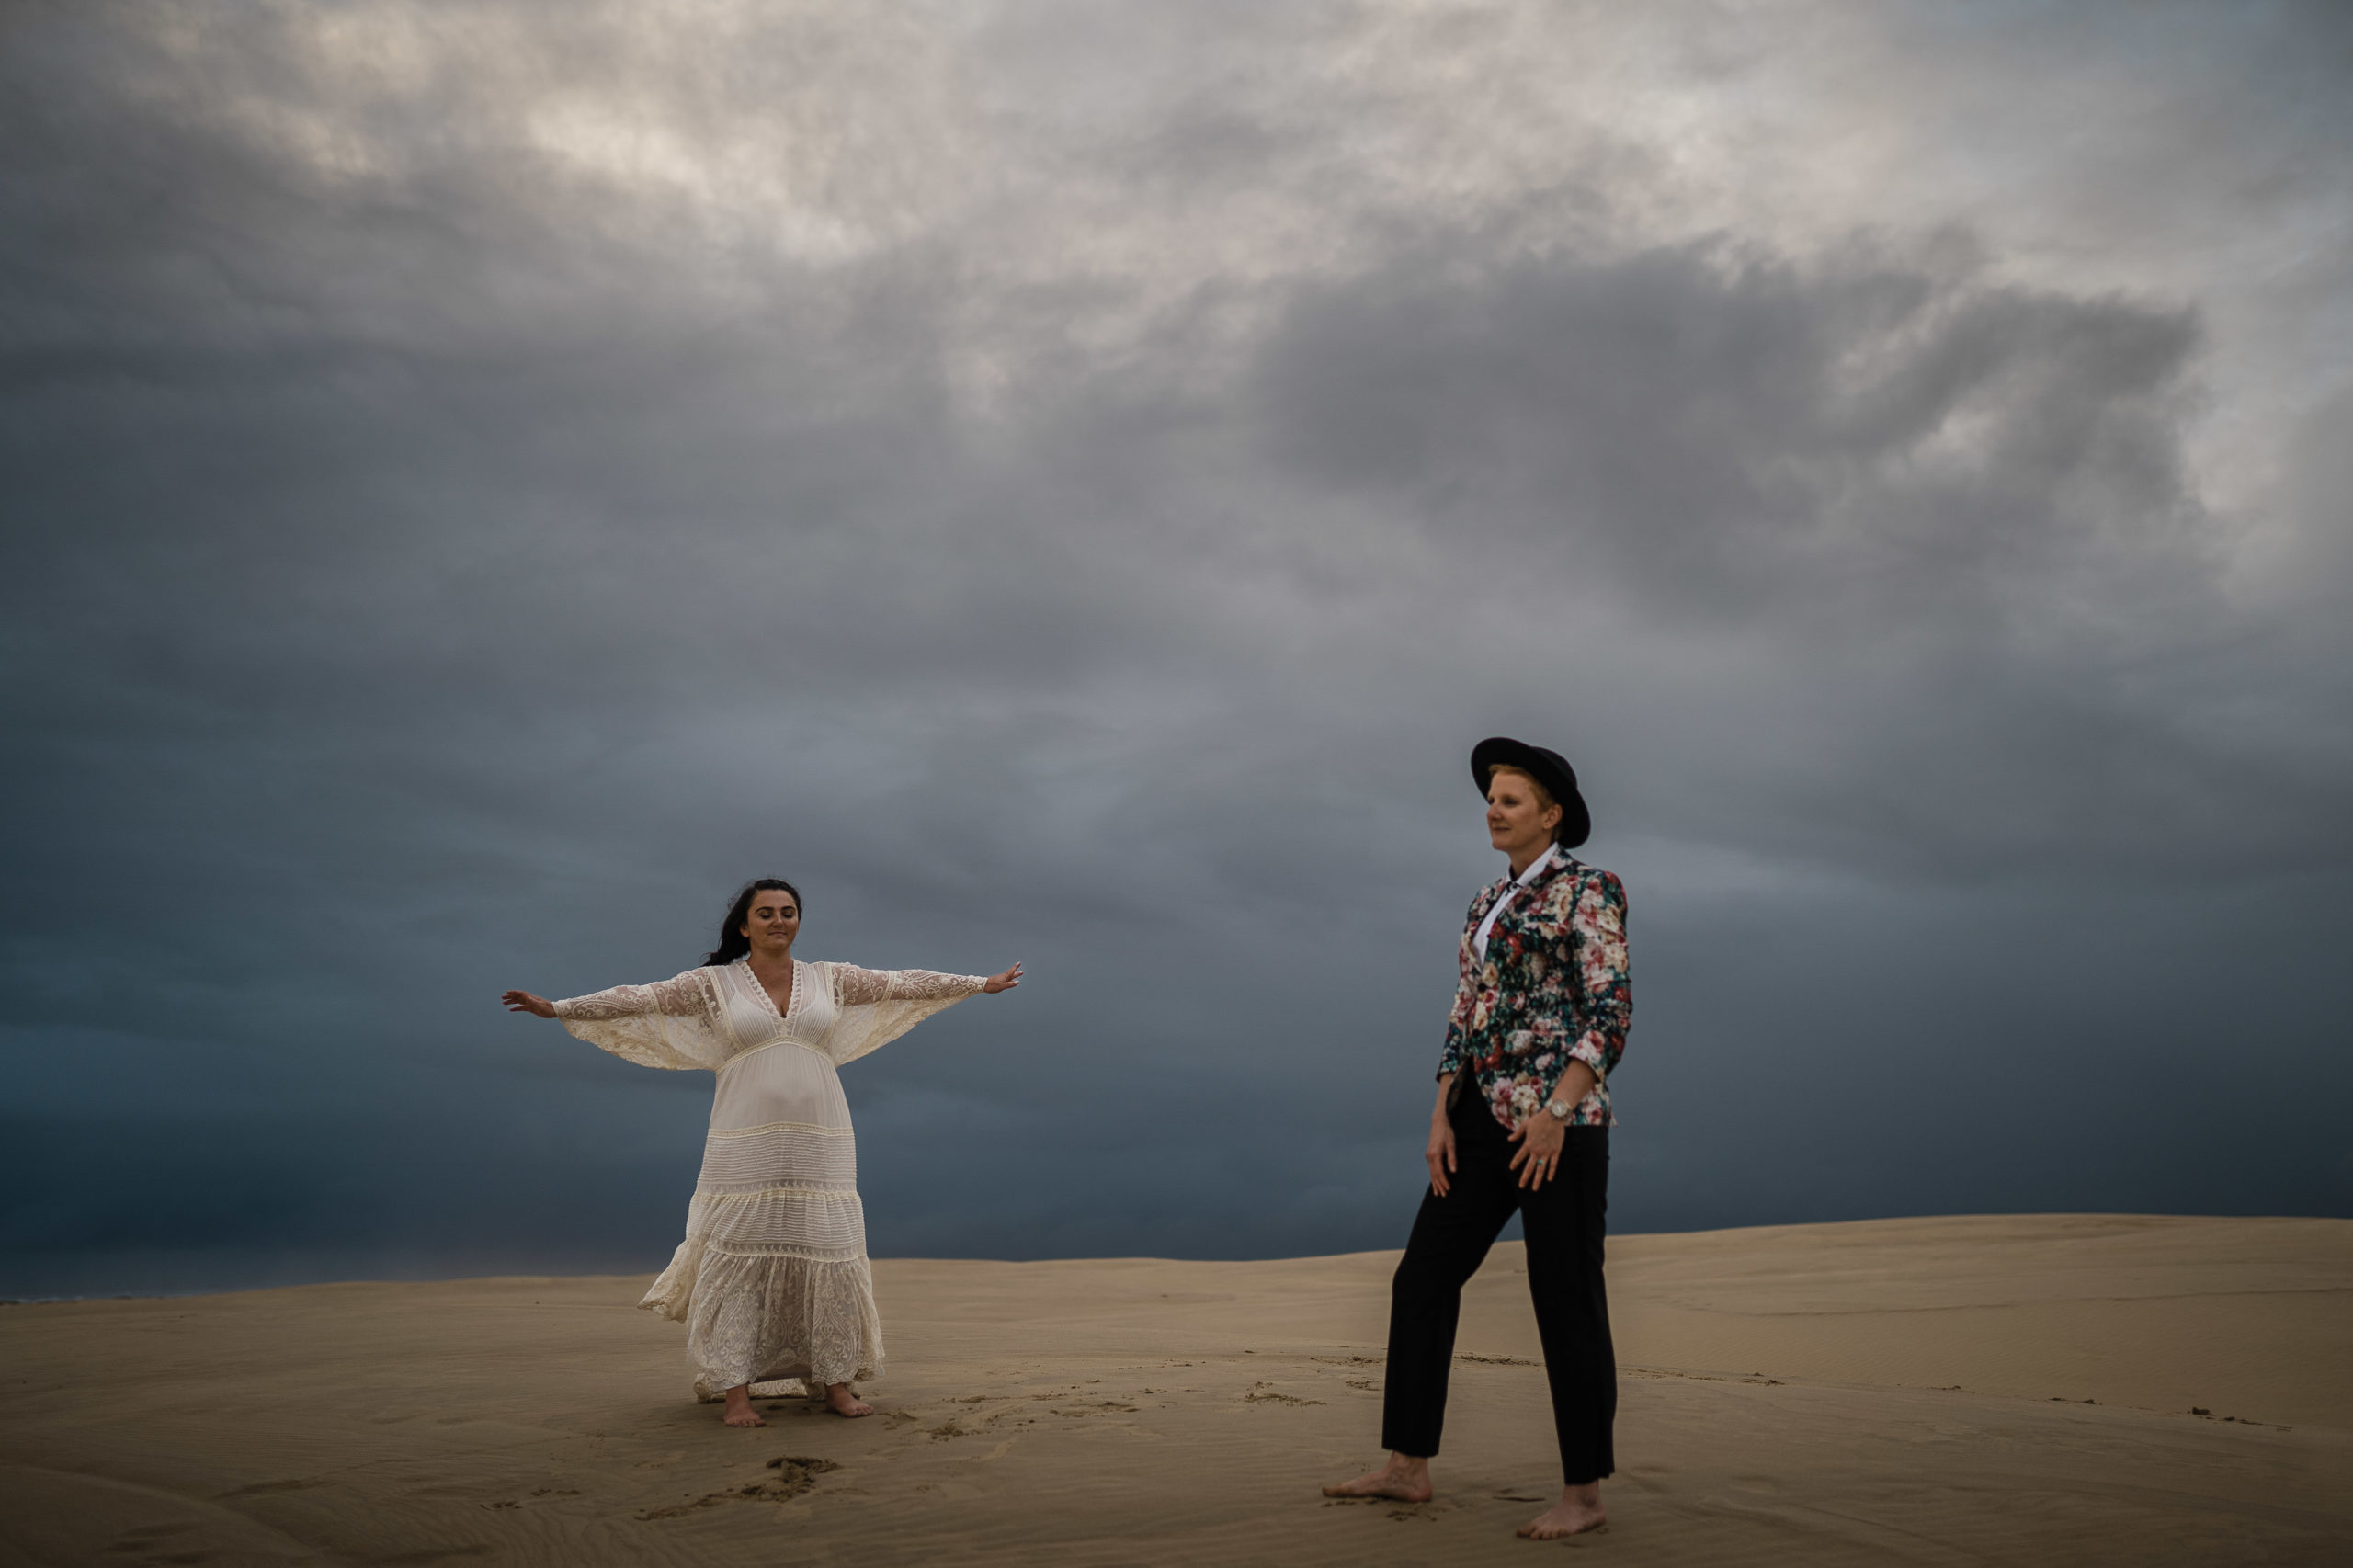 standing on top of the sand dunes during a storm, both brides dance as they are filmed for their intimate wedding film